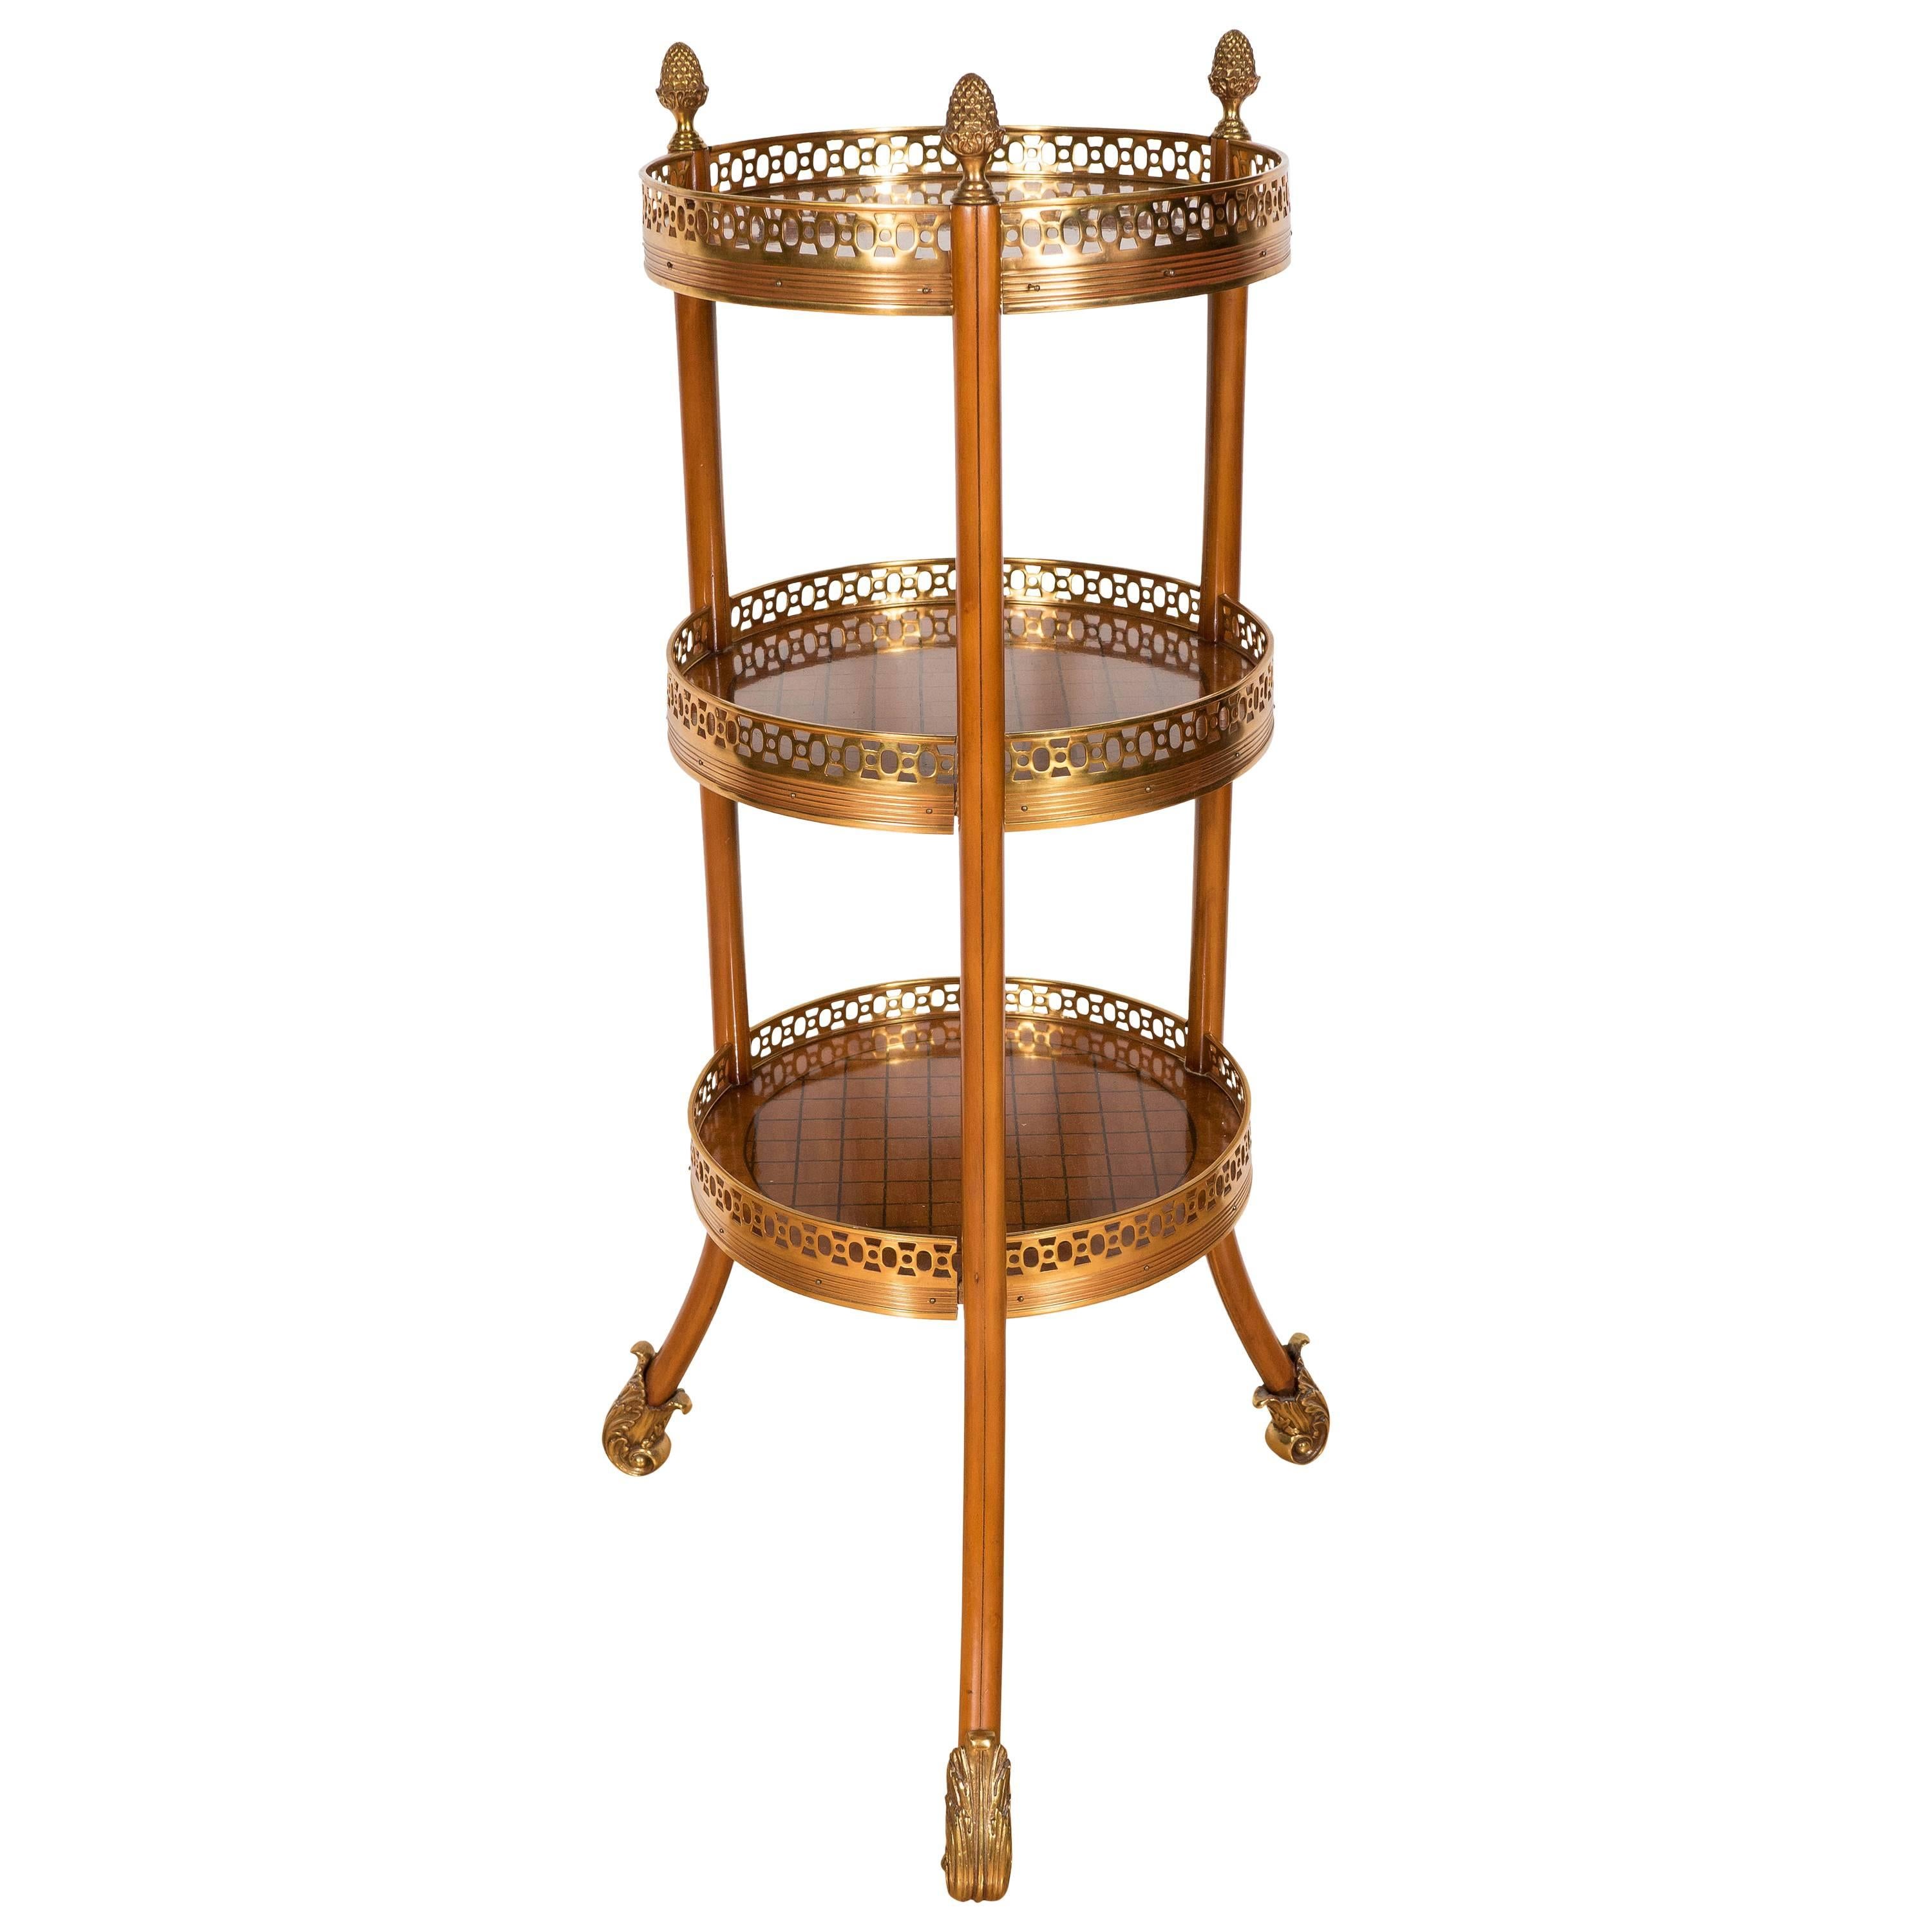  Elegant Three-Tiered Table in Amboyna Wood with Gilded Brass Cage and Accent